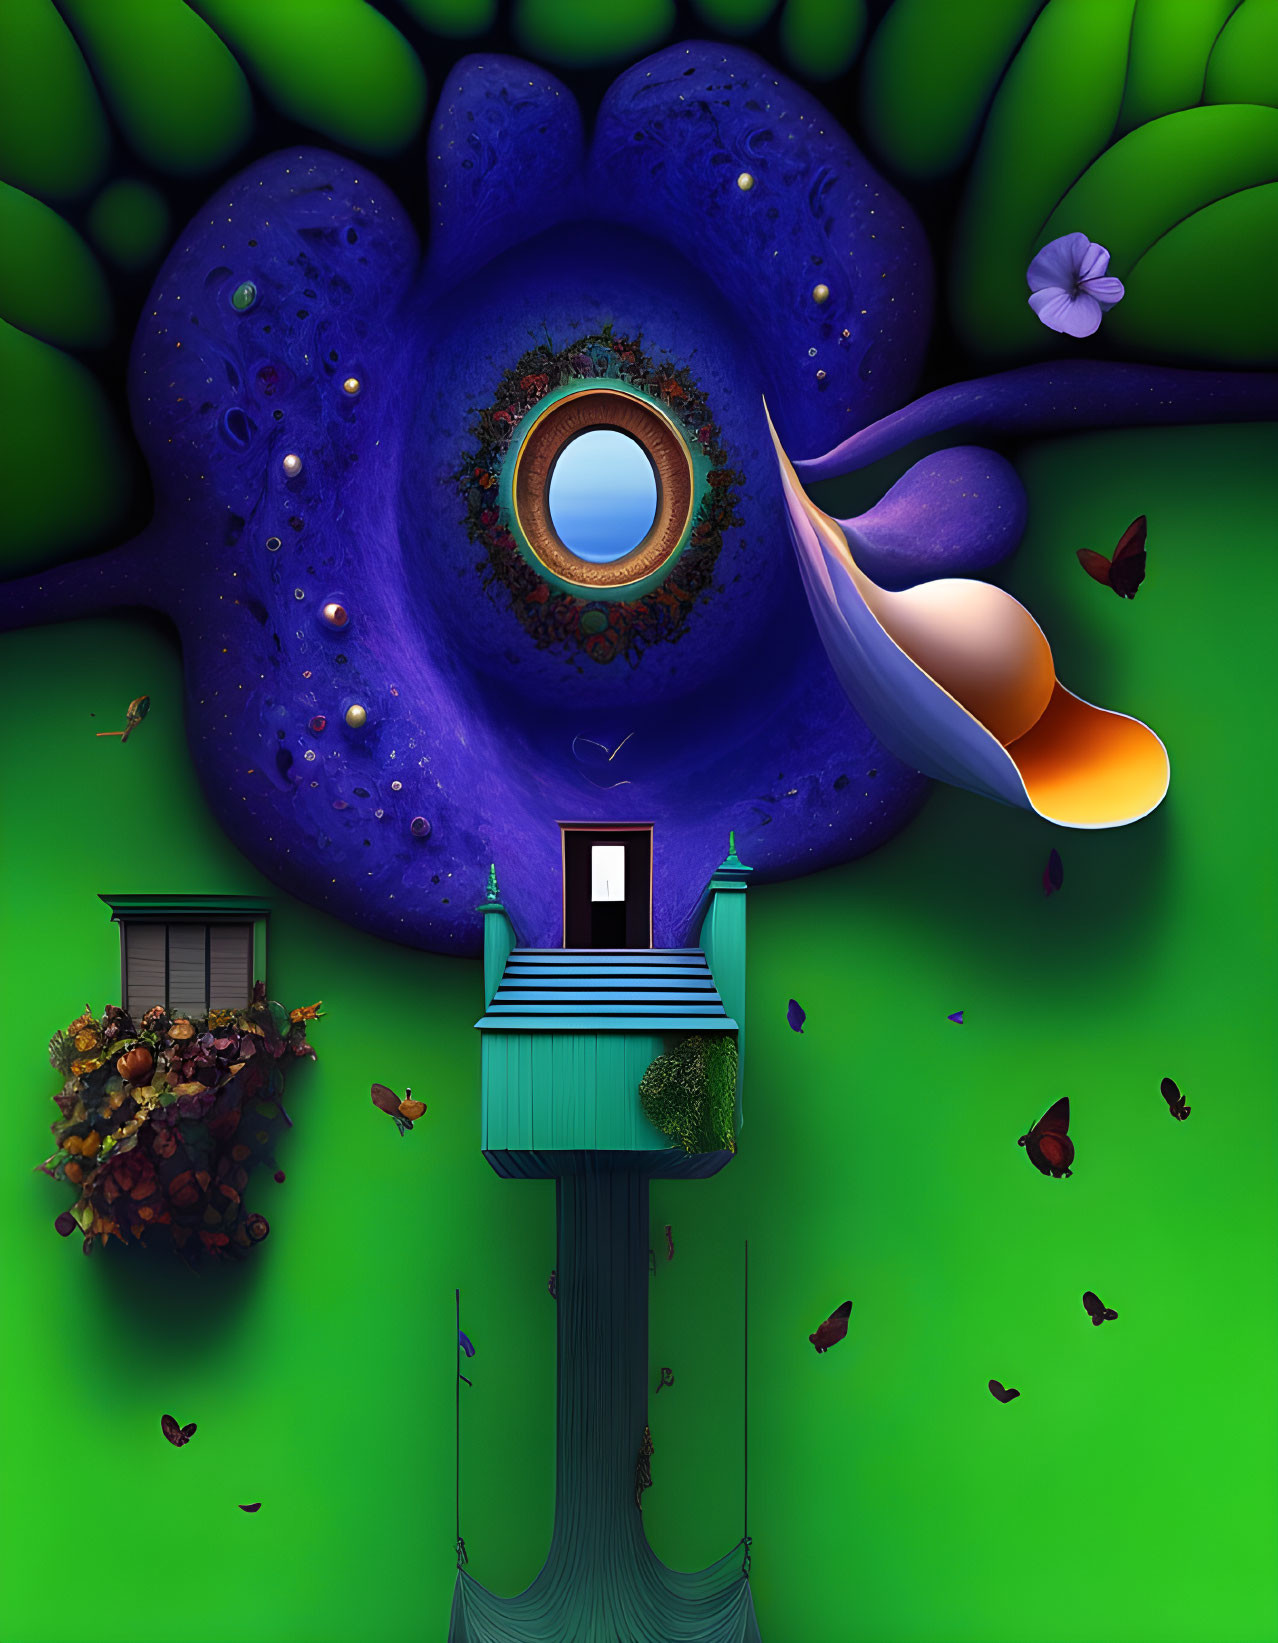 Colorful surreal artwork of house on pedestal with large blue eye-like flower and fluttering butterflies